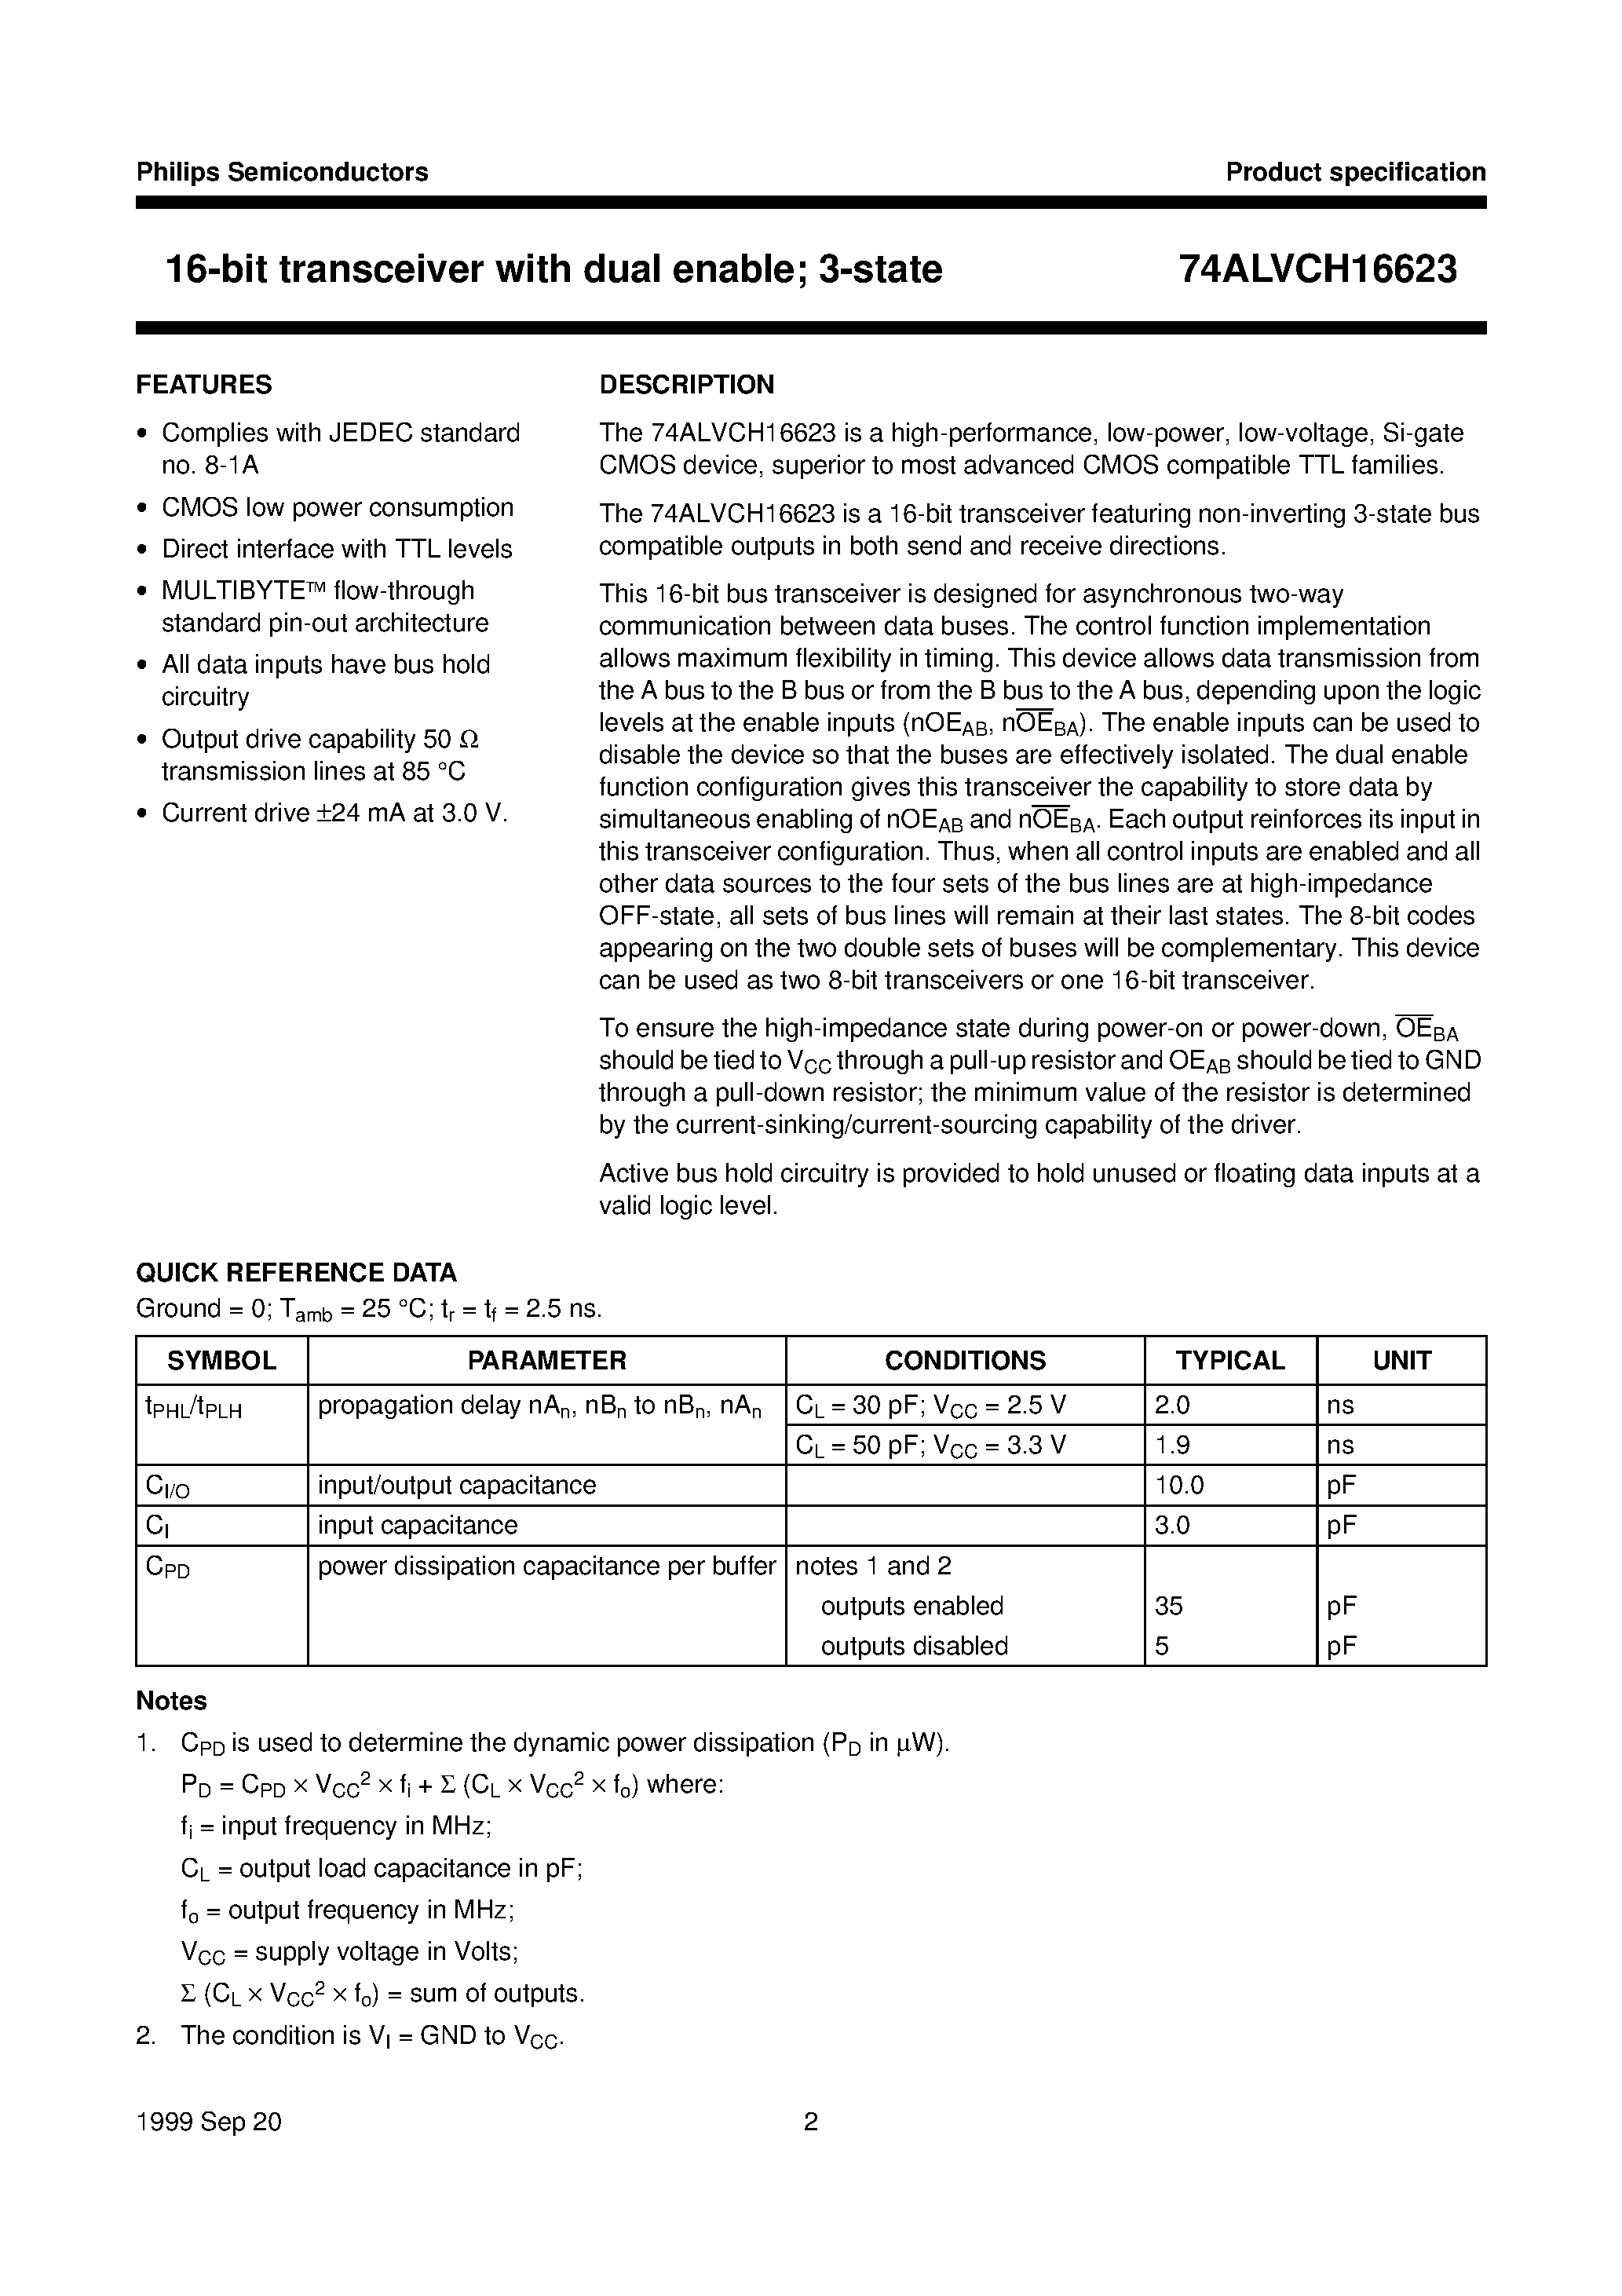 Datasheet 74ALVCH16623DGG - 16-bit transceiver with dual enable; 3-state page 2